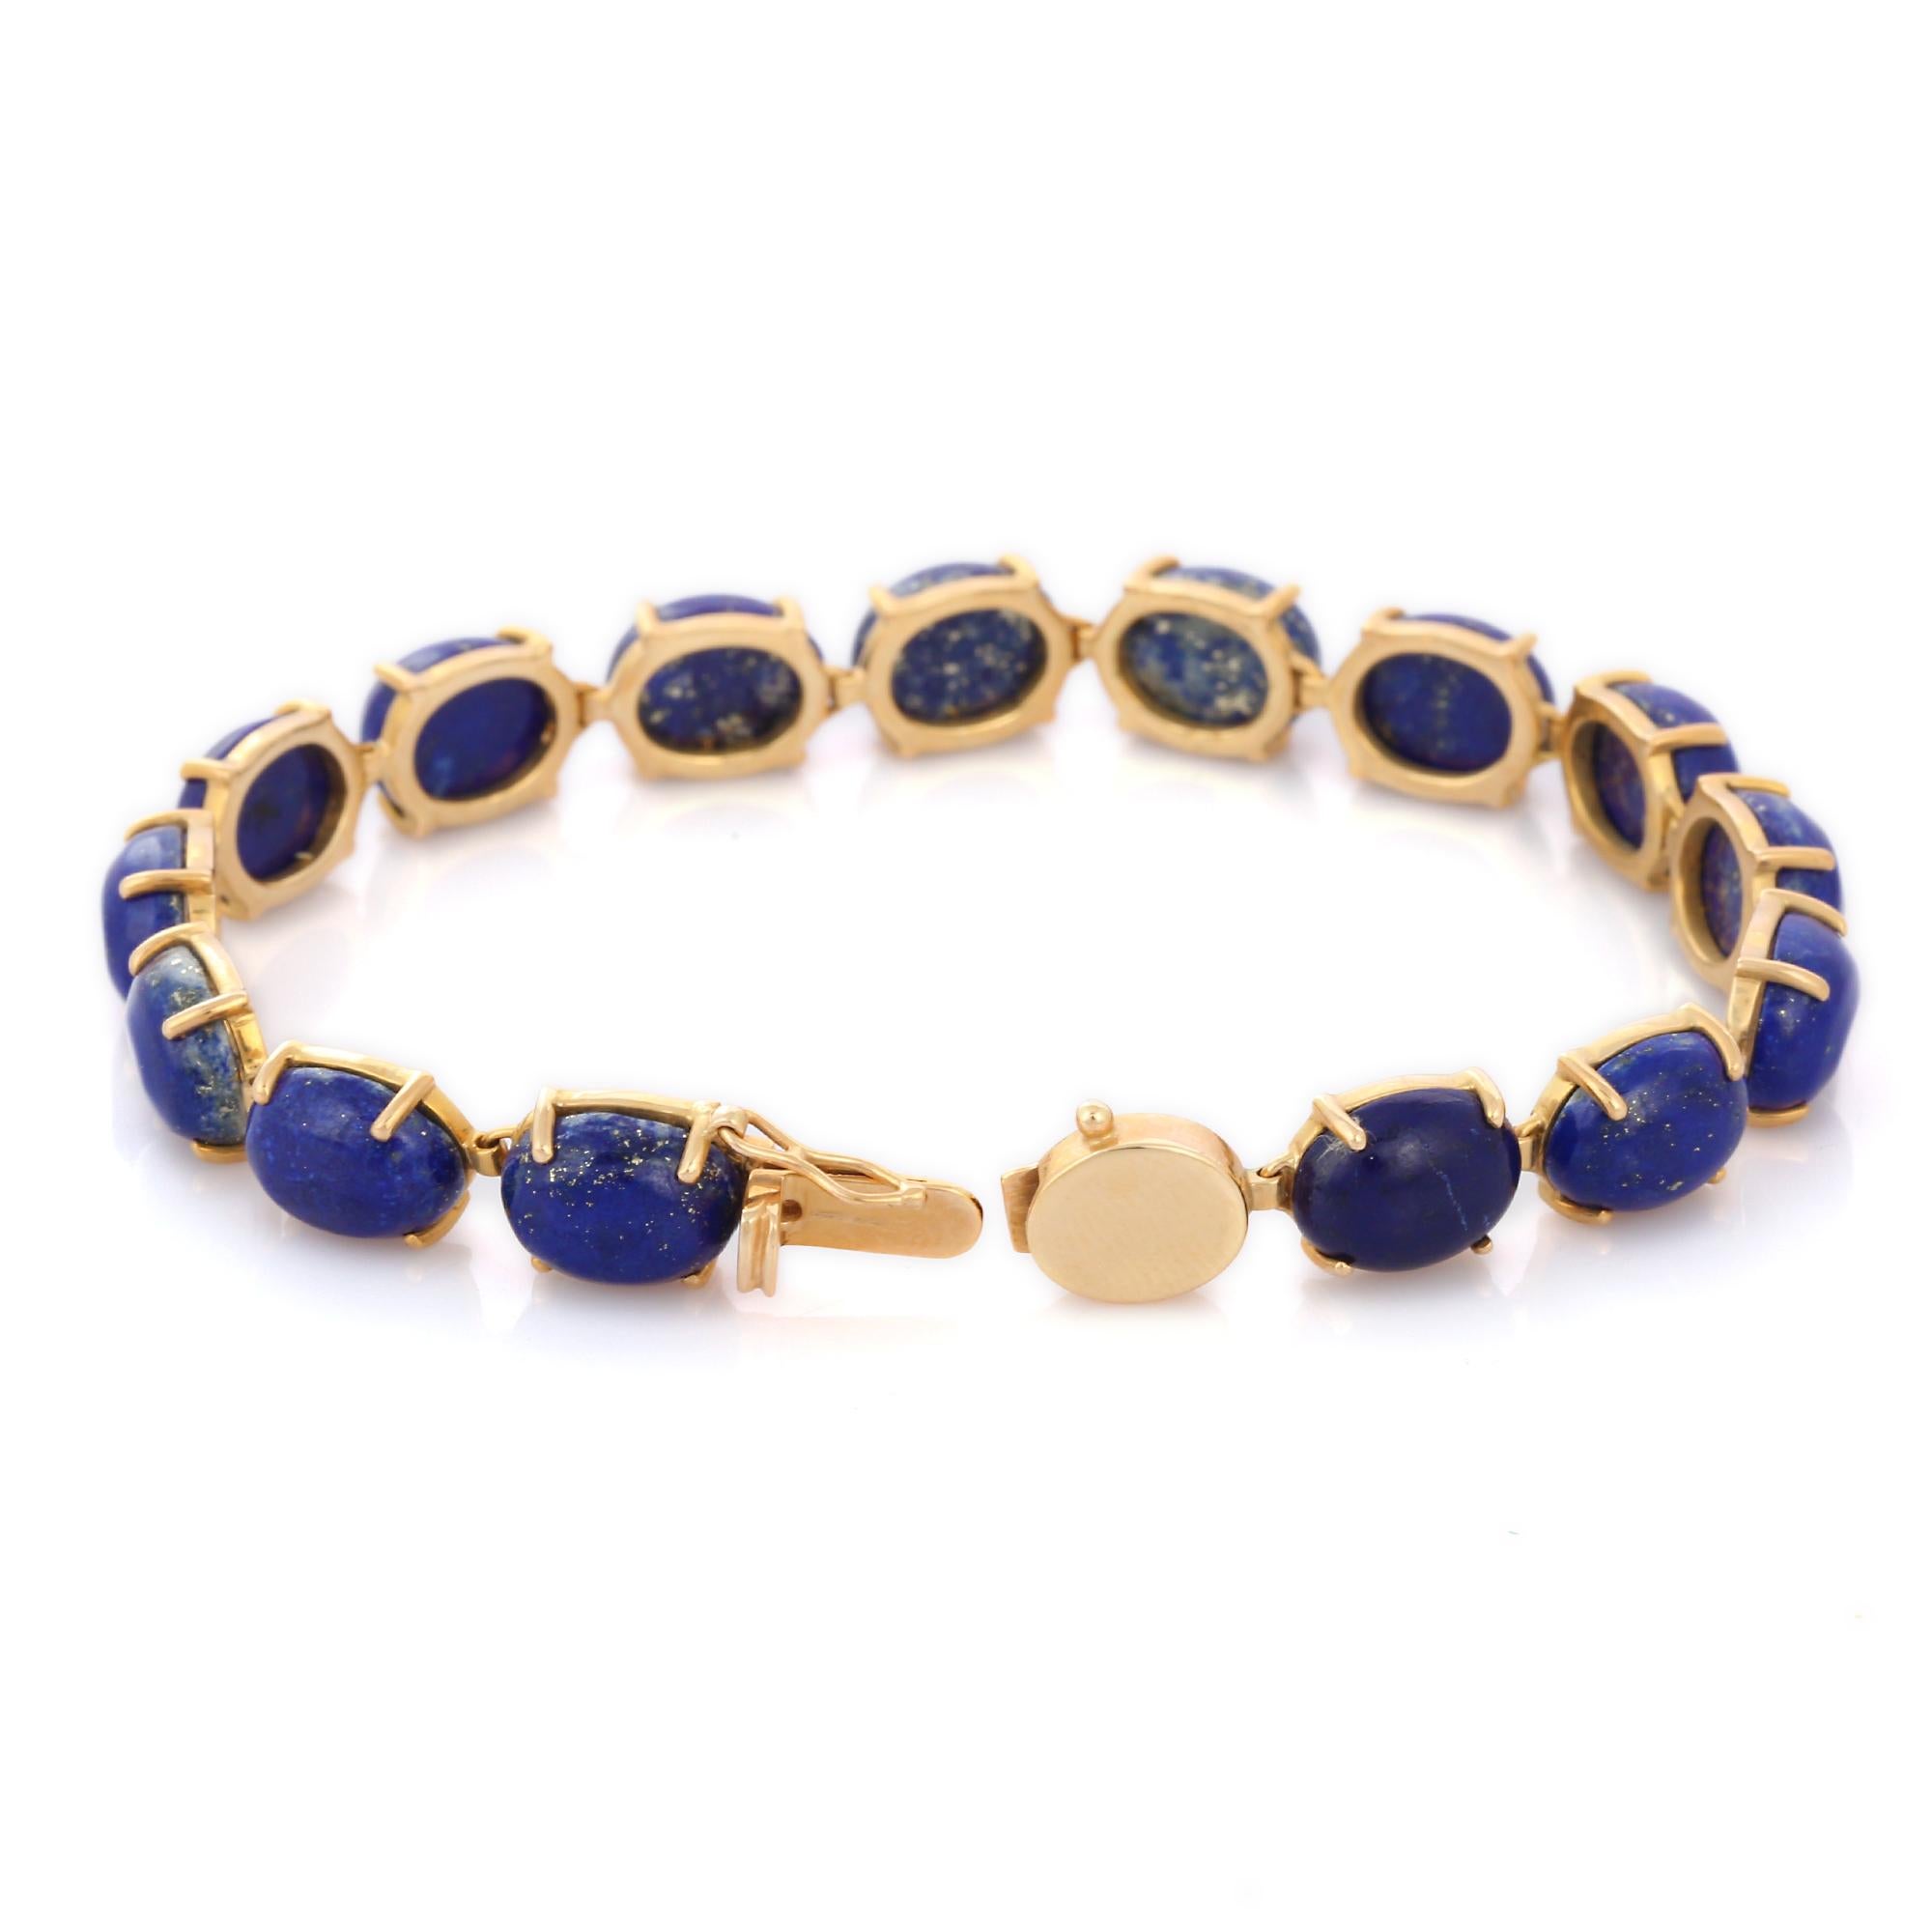 Modern 43 Ct Oval Cut Lapis Lazuli Prong Set Tennis Bracelet in 14K Solid Yellow Gold For Sale